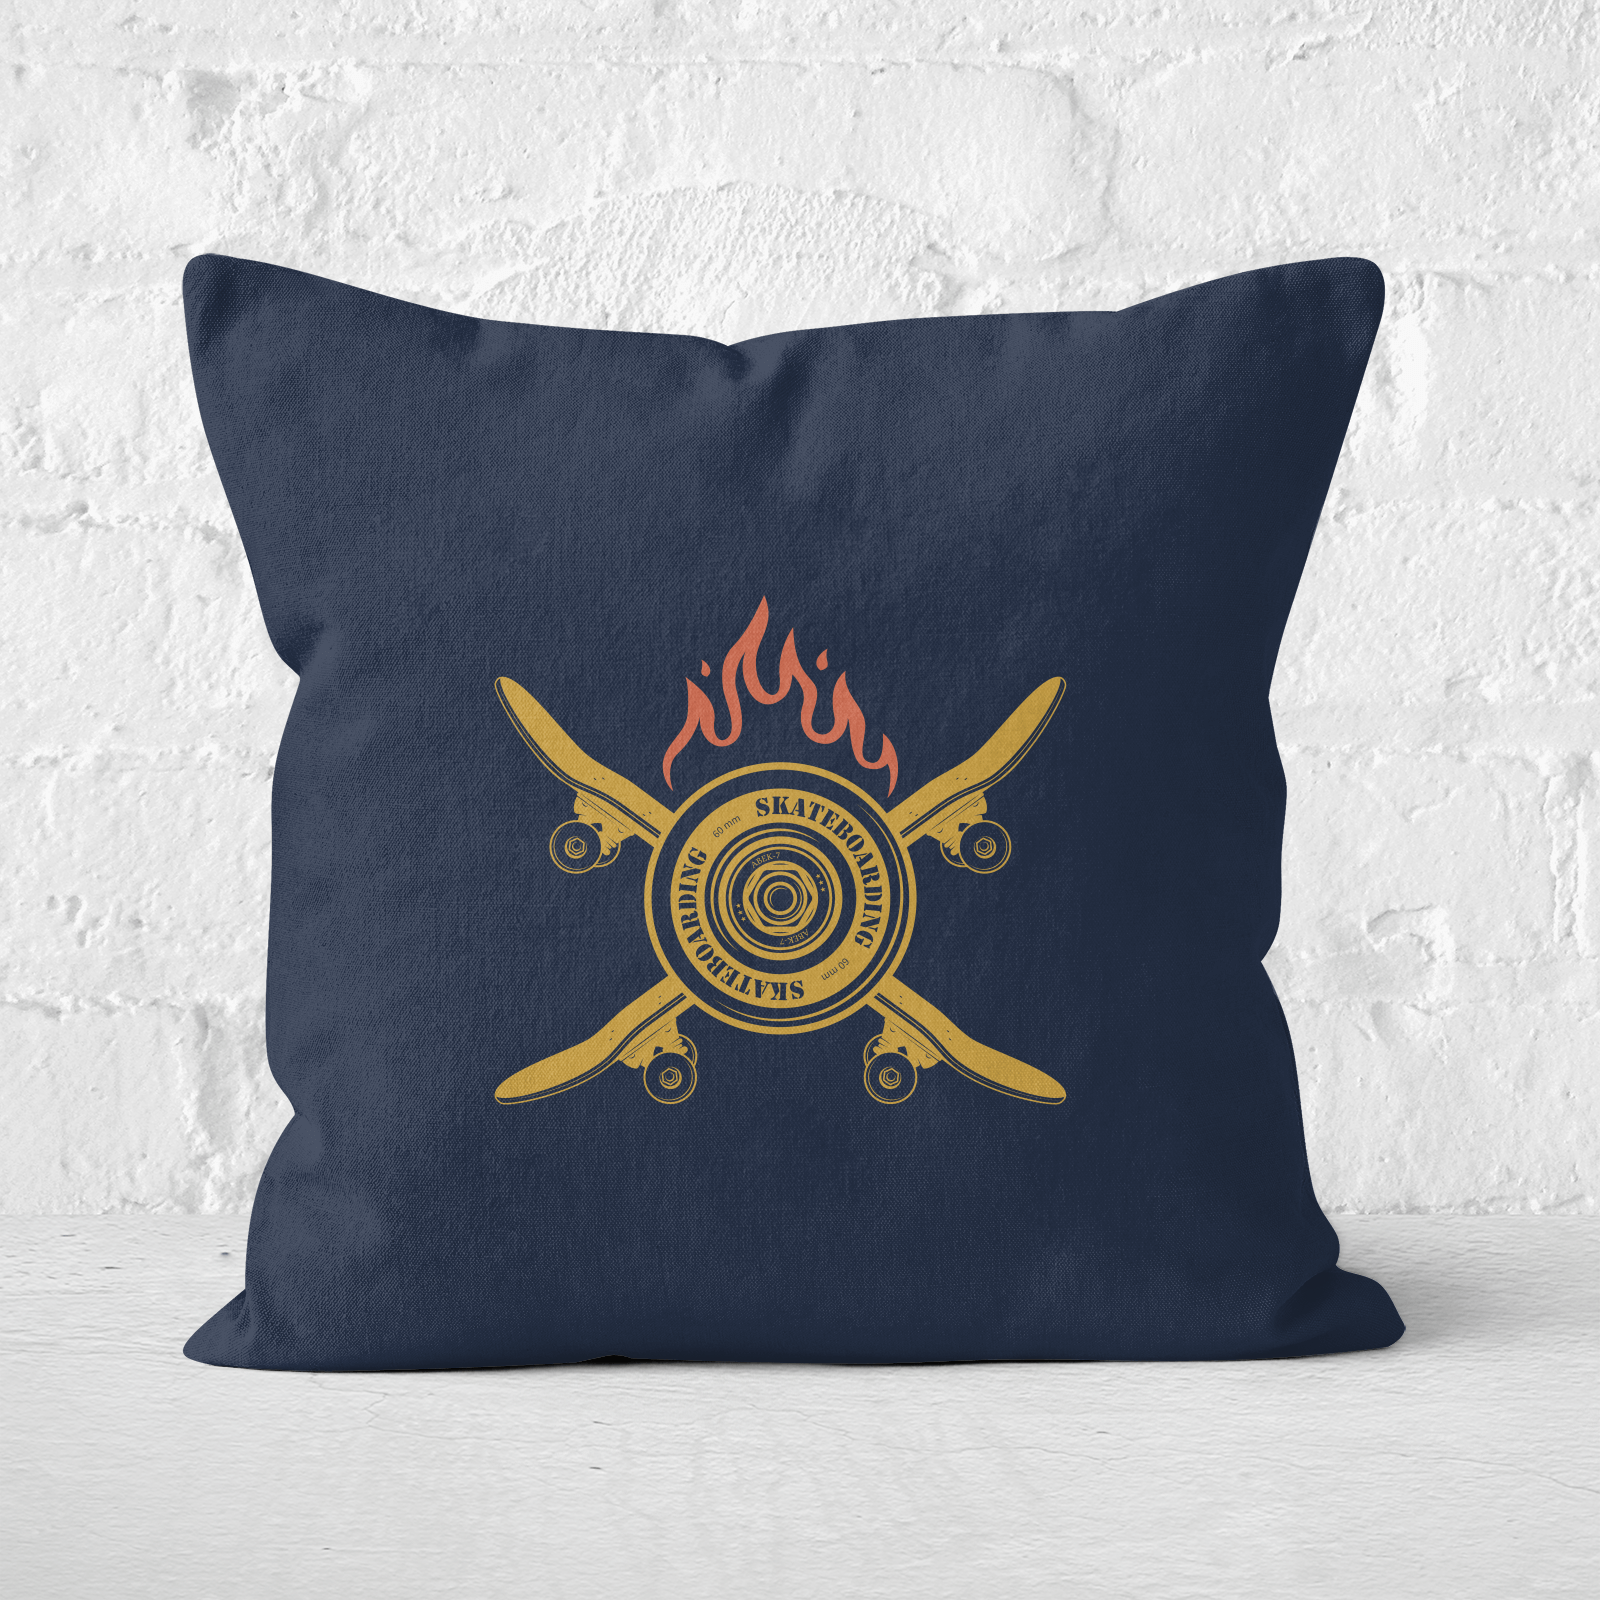 Skateboards On Fire Square Cushion - 60x60cm - Soft Touch